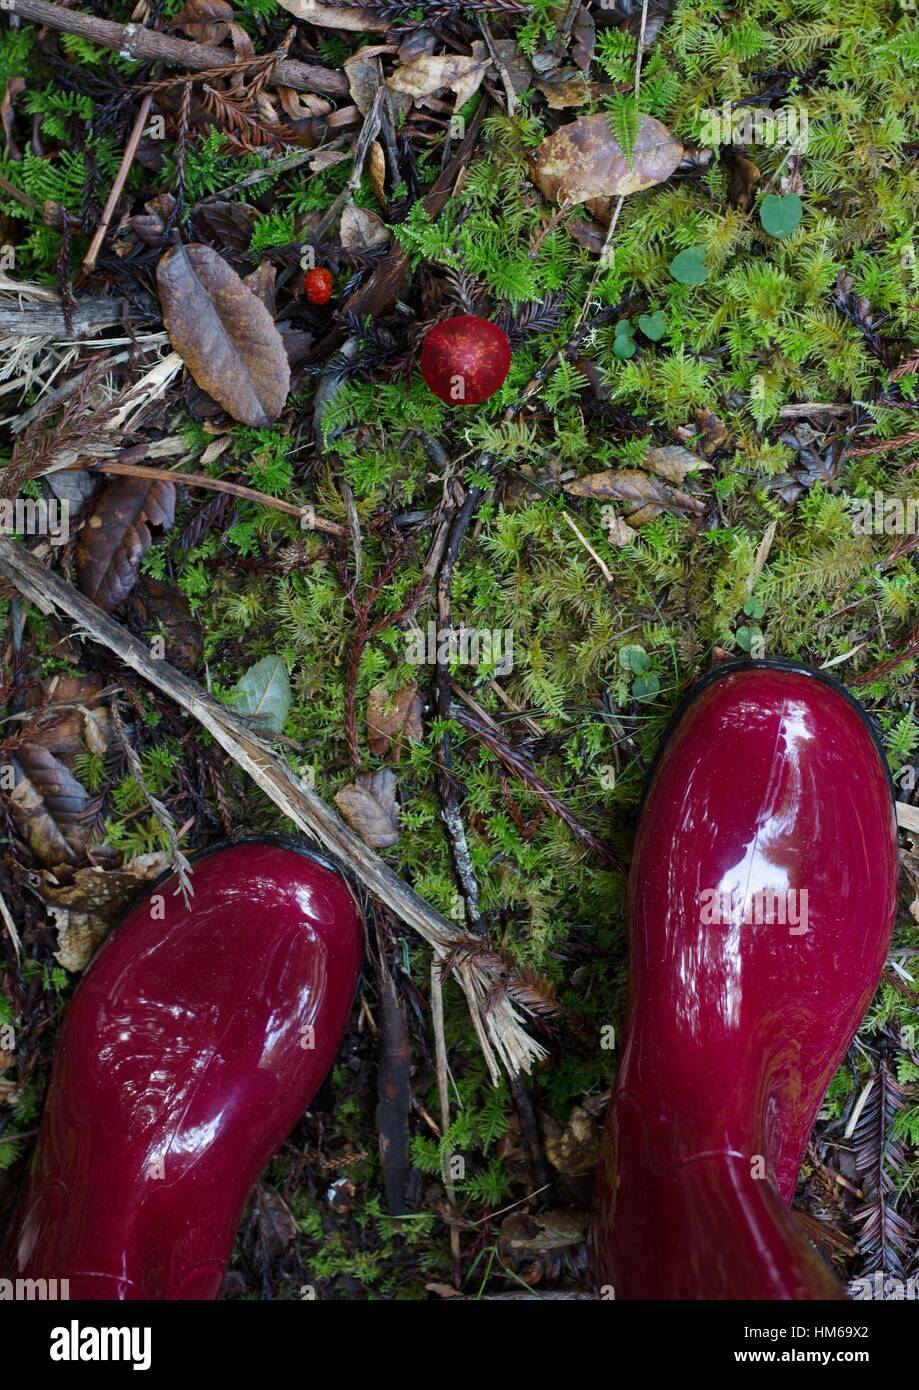 Shiny red rain boots standing near a red berry and a red mushroom in a forest. Stock Photo